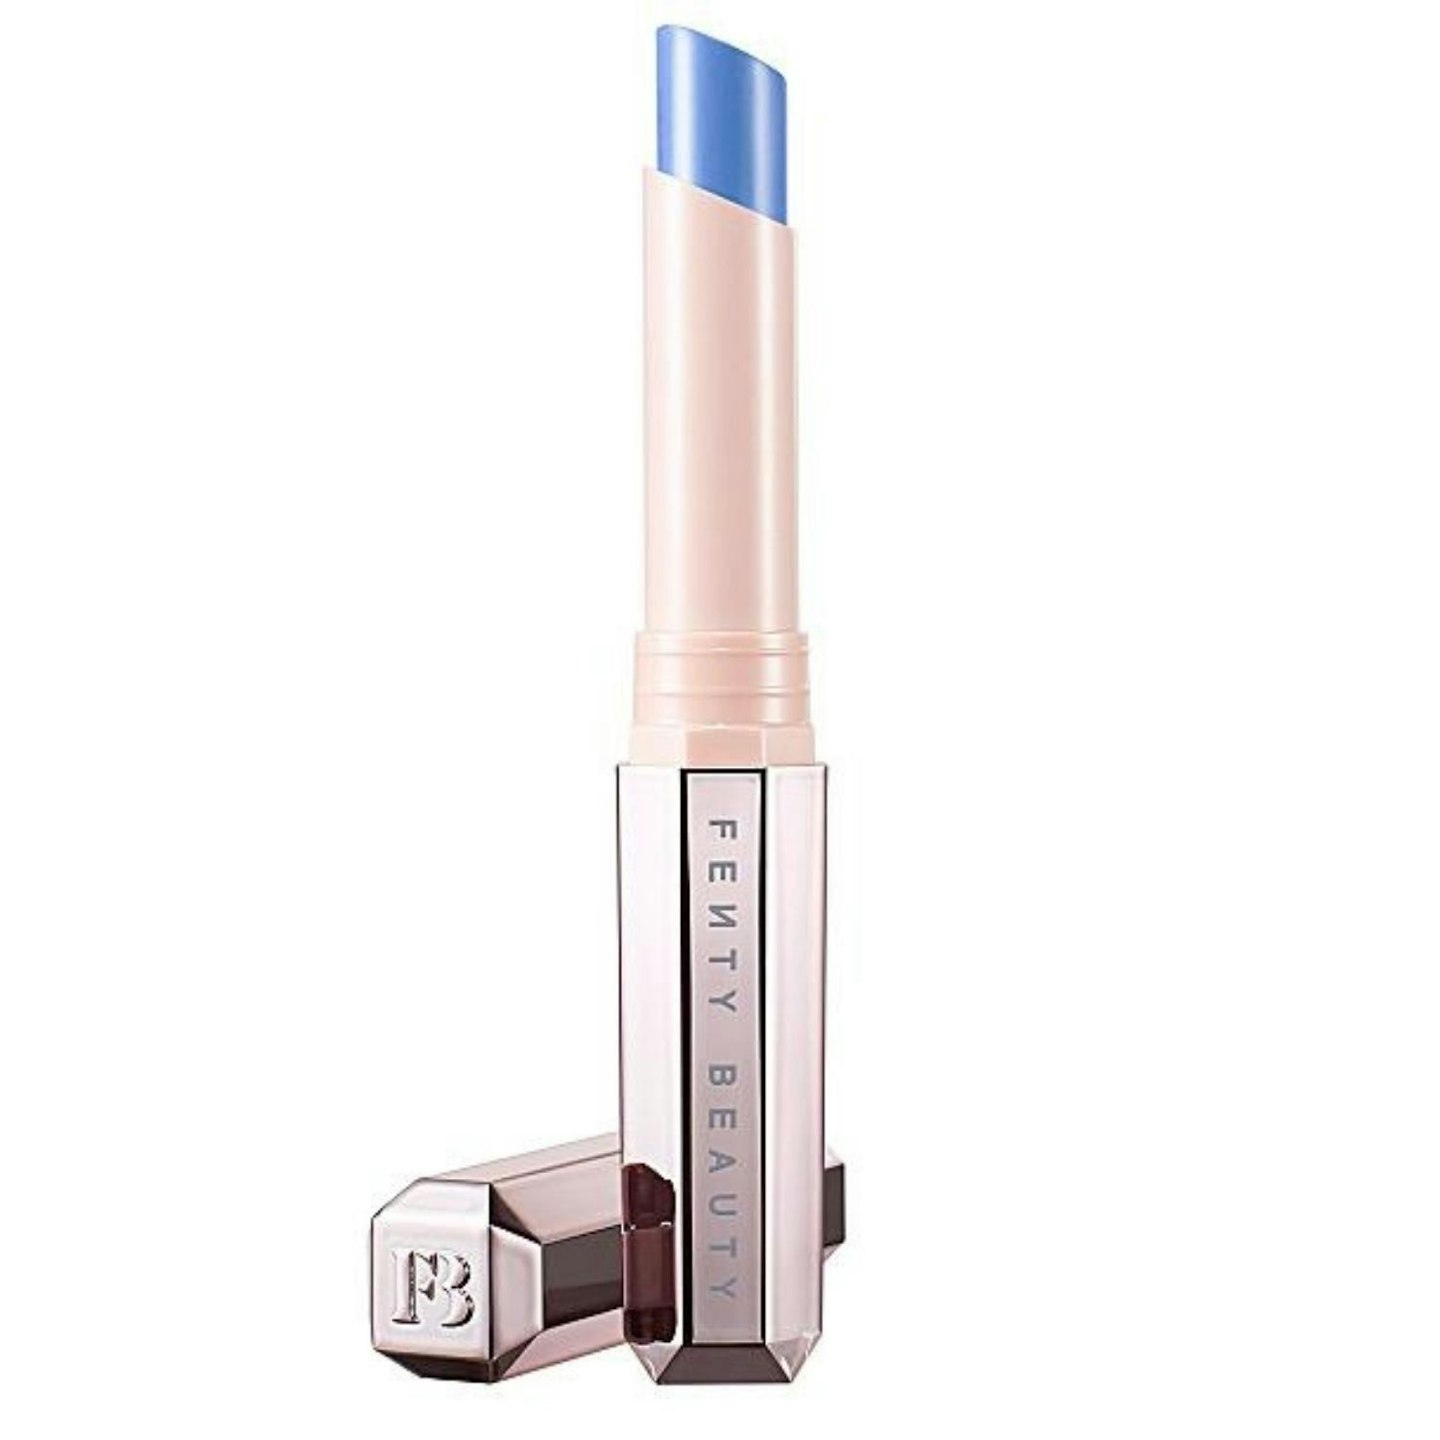 The Best Blue Lipsticks For The Ultimate Y2k Rihanna Moment